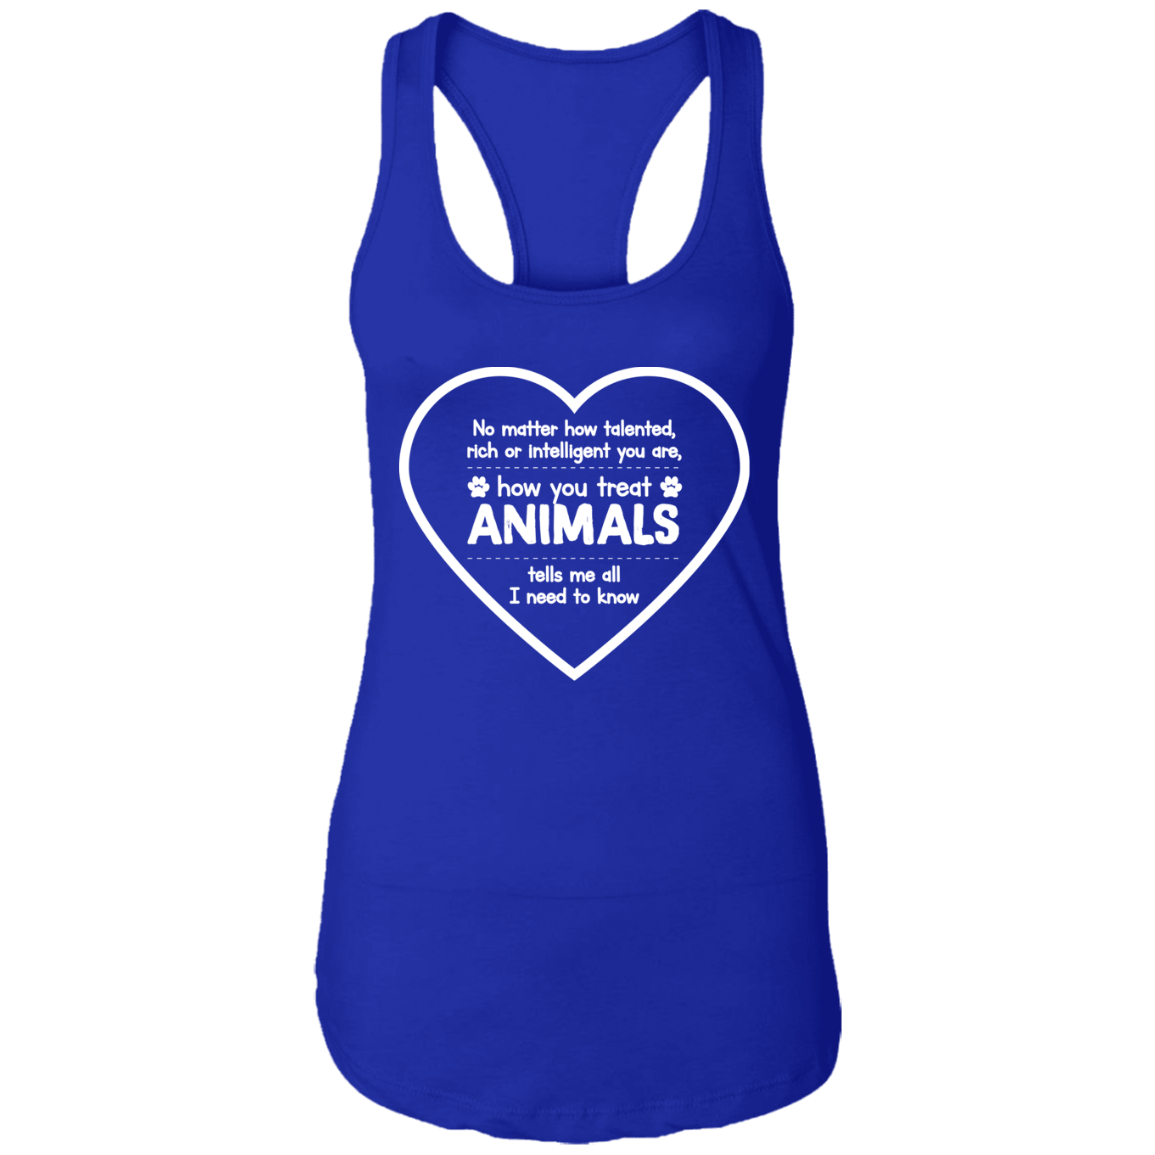 How You Treat Animals - Ladies Racer Back Tank.